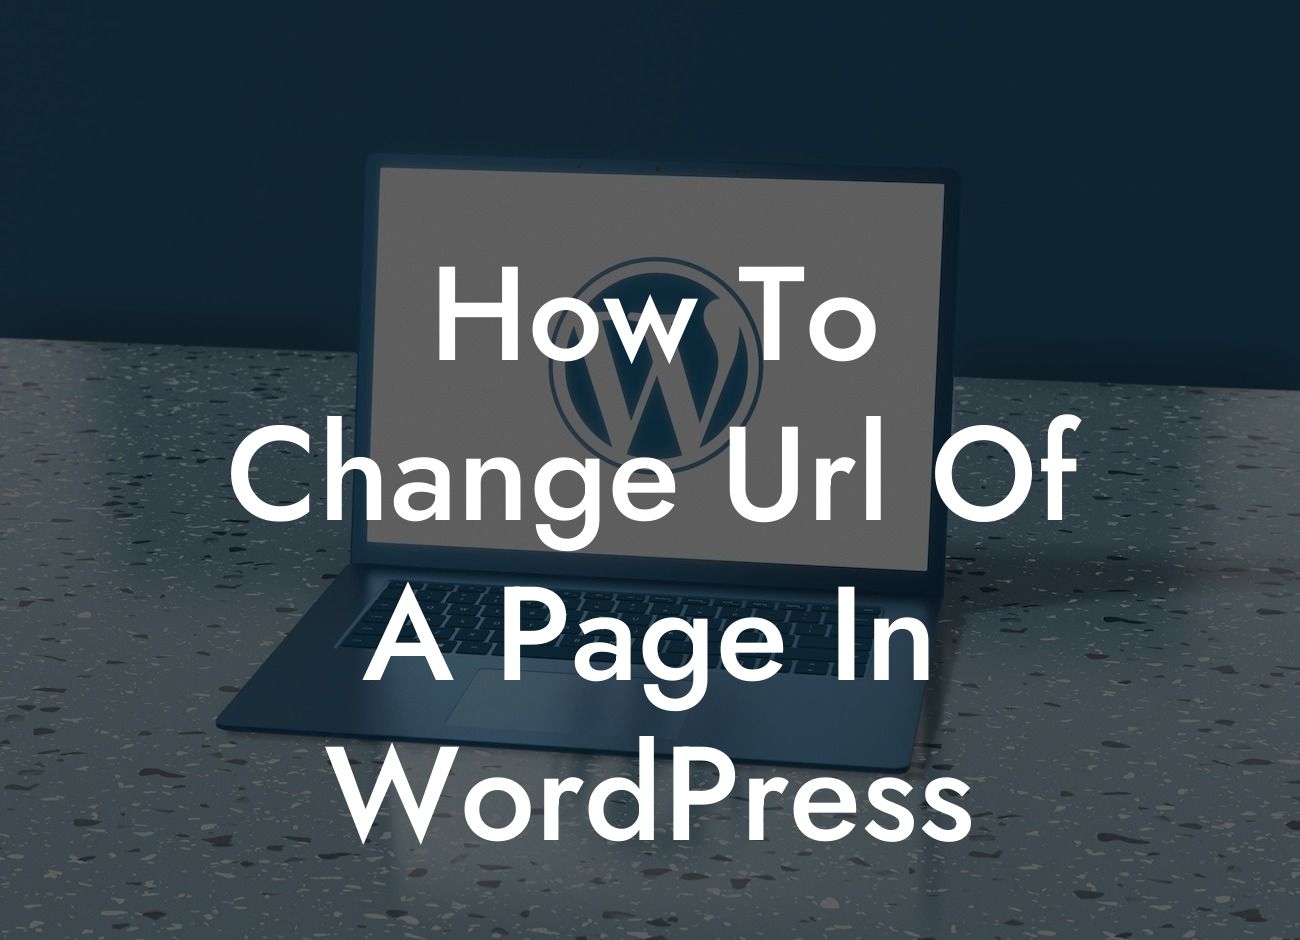 How To Change Url Of A Page In WordPress